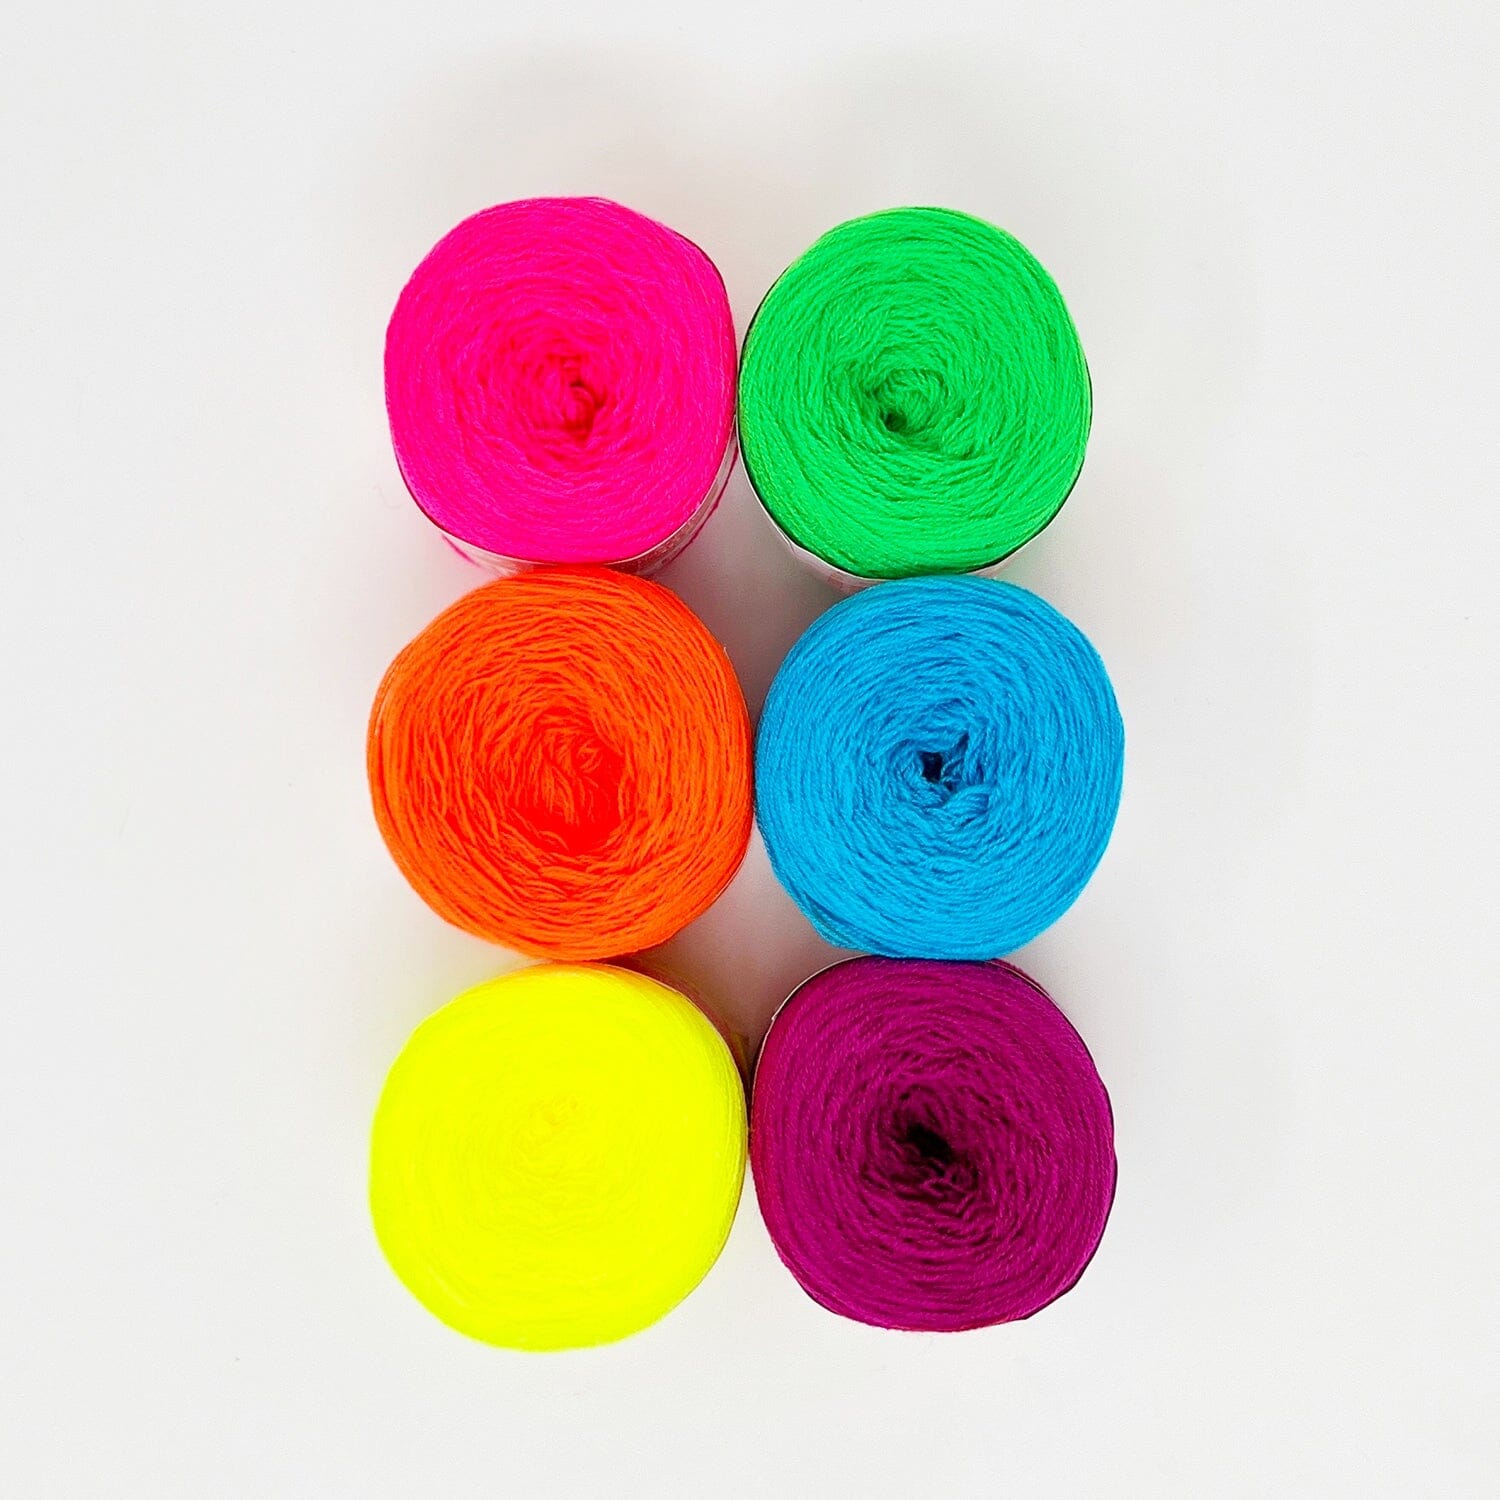 Favorito Yarn - The Whole Rainbow! (44 Skeins) – The Neon Tea Party